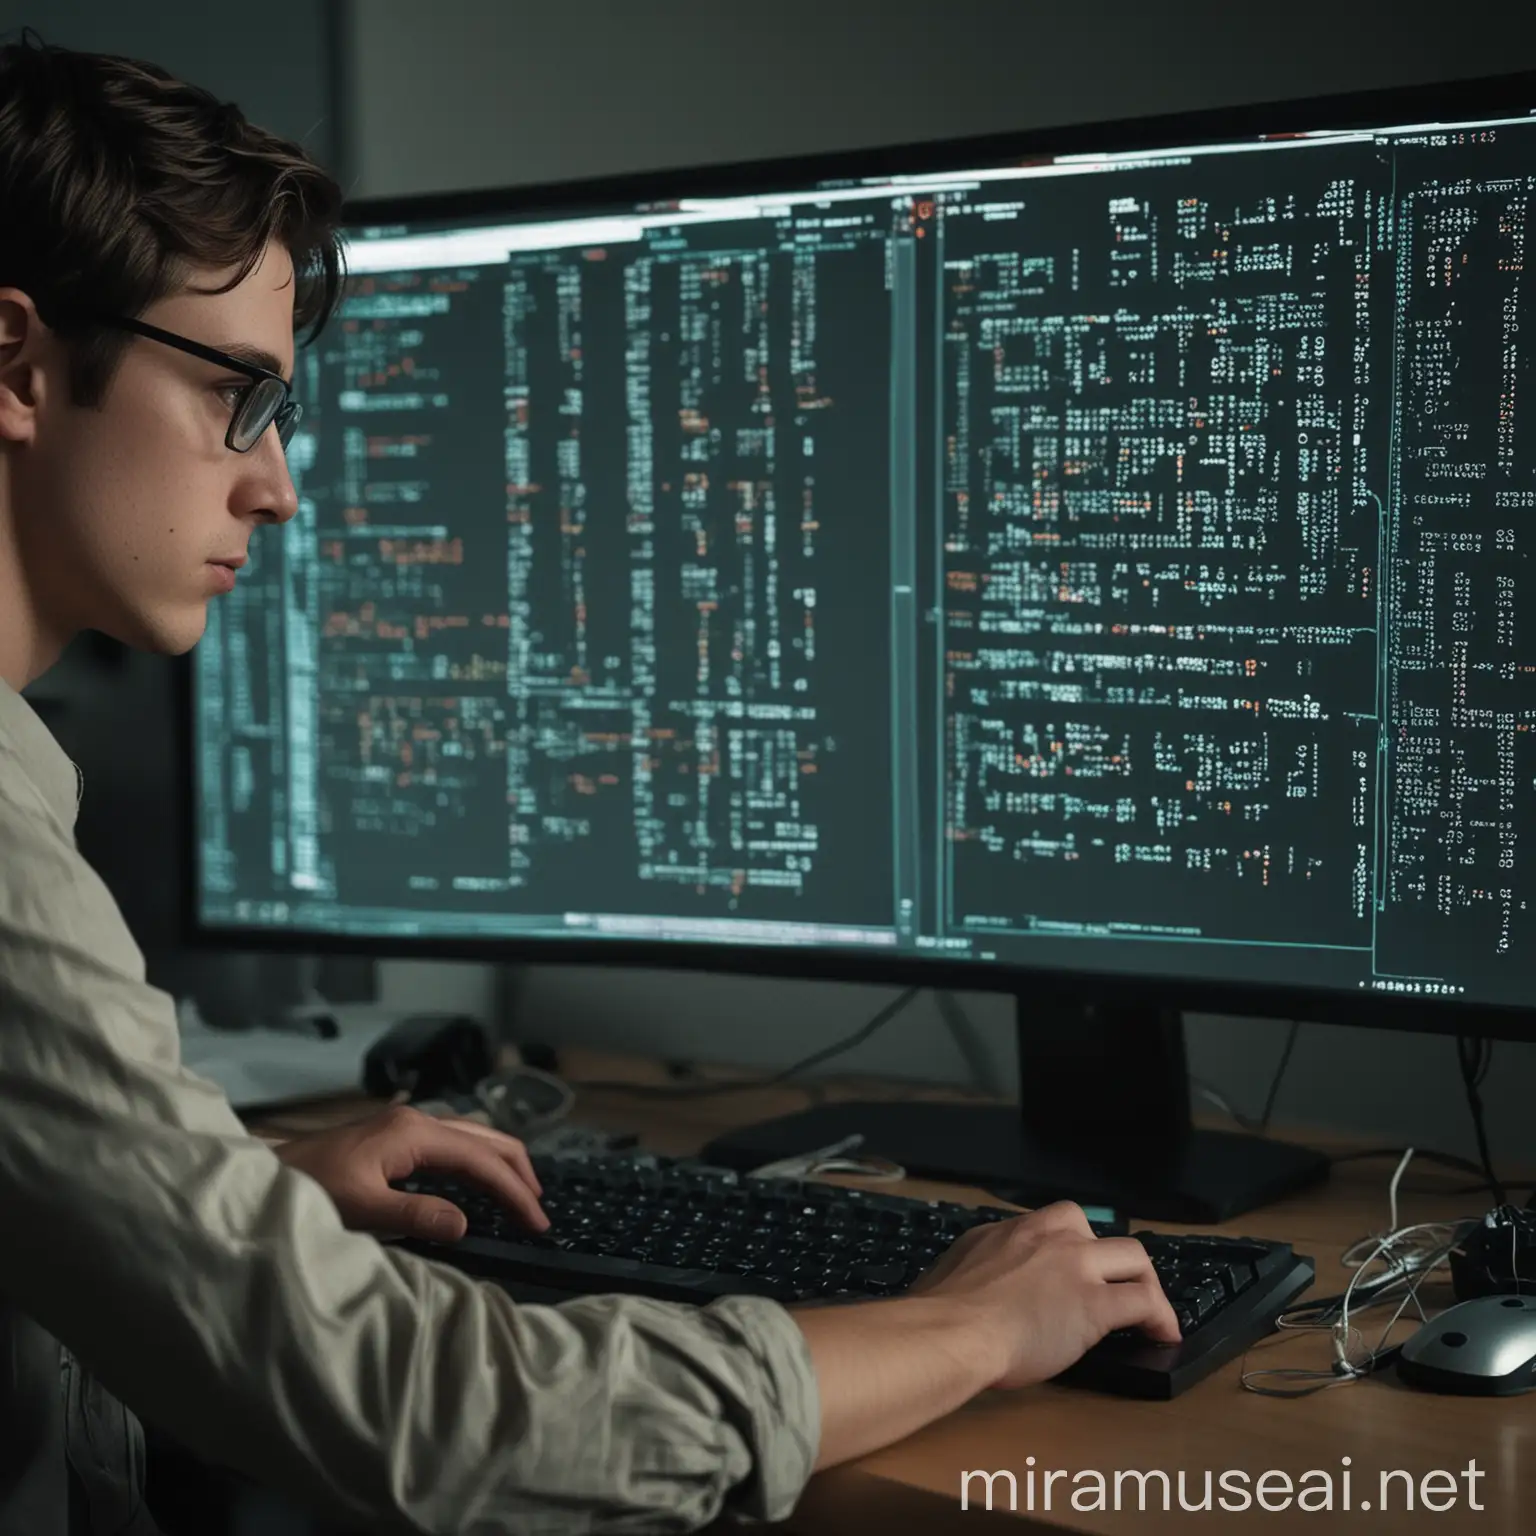 /imagine prompt: Realistic, personality: A person, Alex, is intensely focused while sitting at a desk, working on a computer. The screen shows lines of code and various security tools running. -q 2 --v 5.2 --ar 16:9